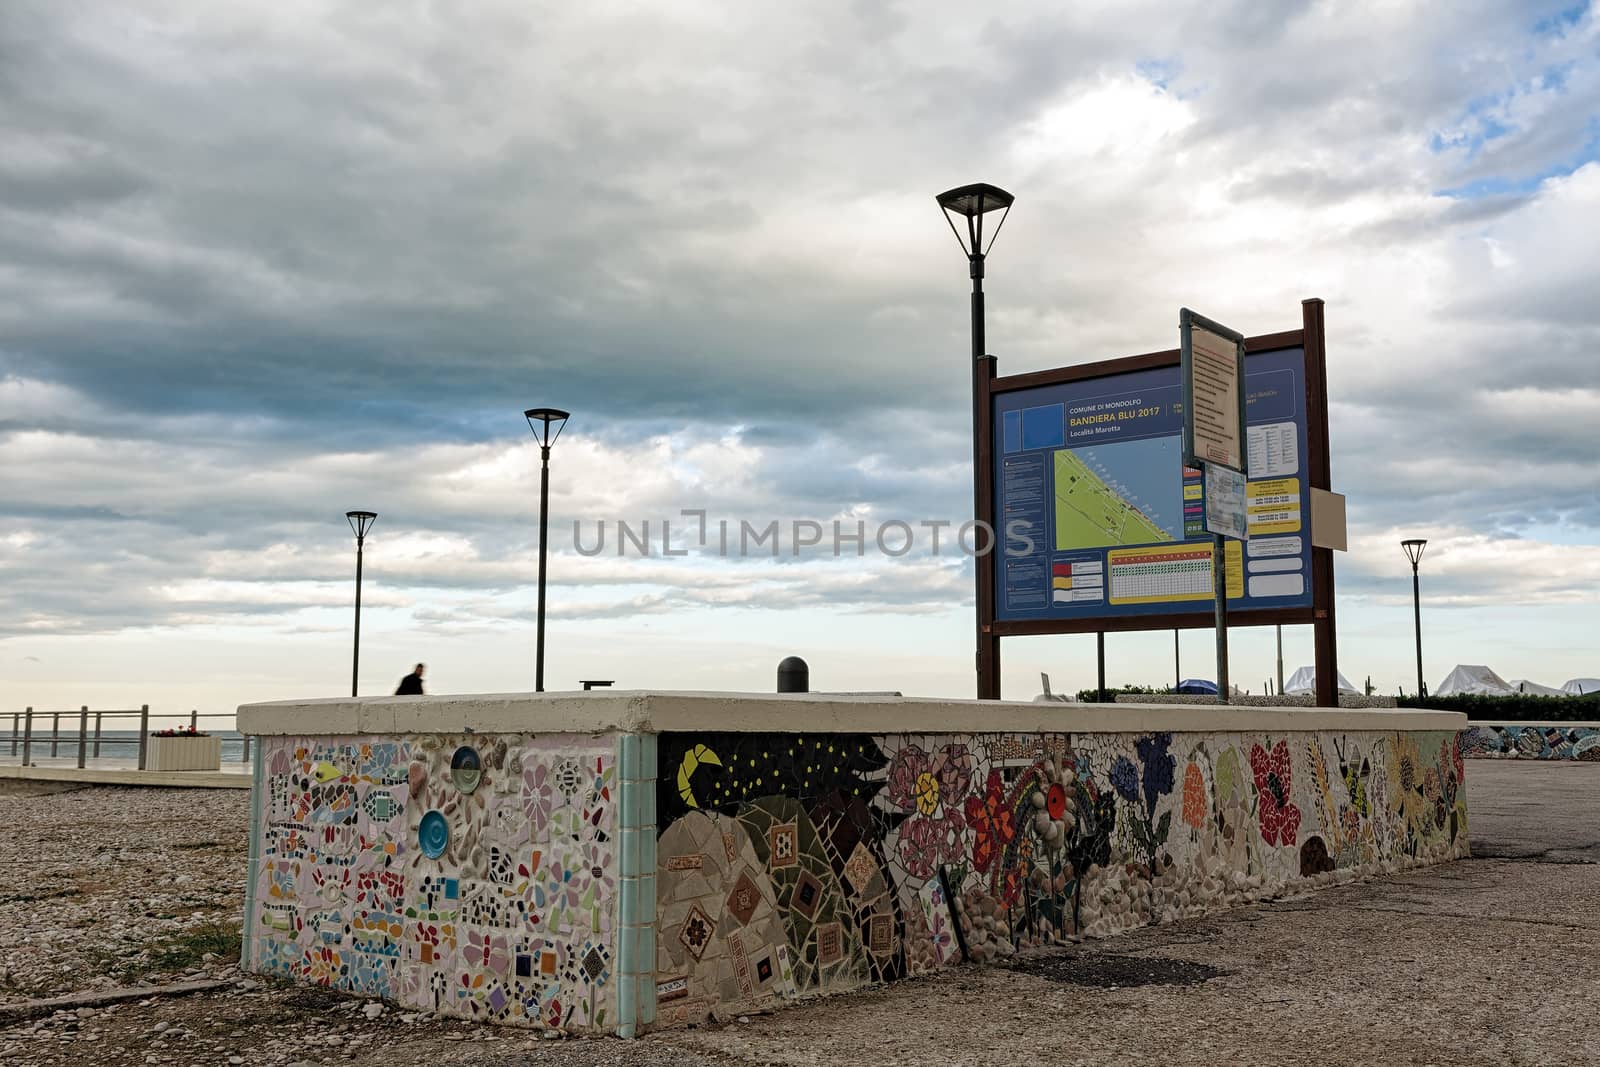 The mosaic on the wall in the seafront of Marotta under a cloudy sky, Italy